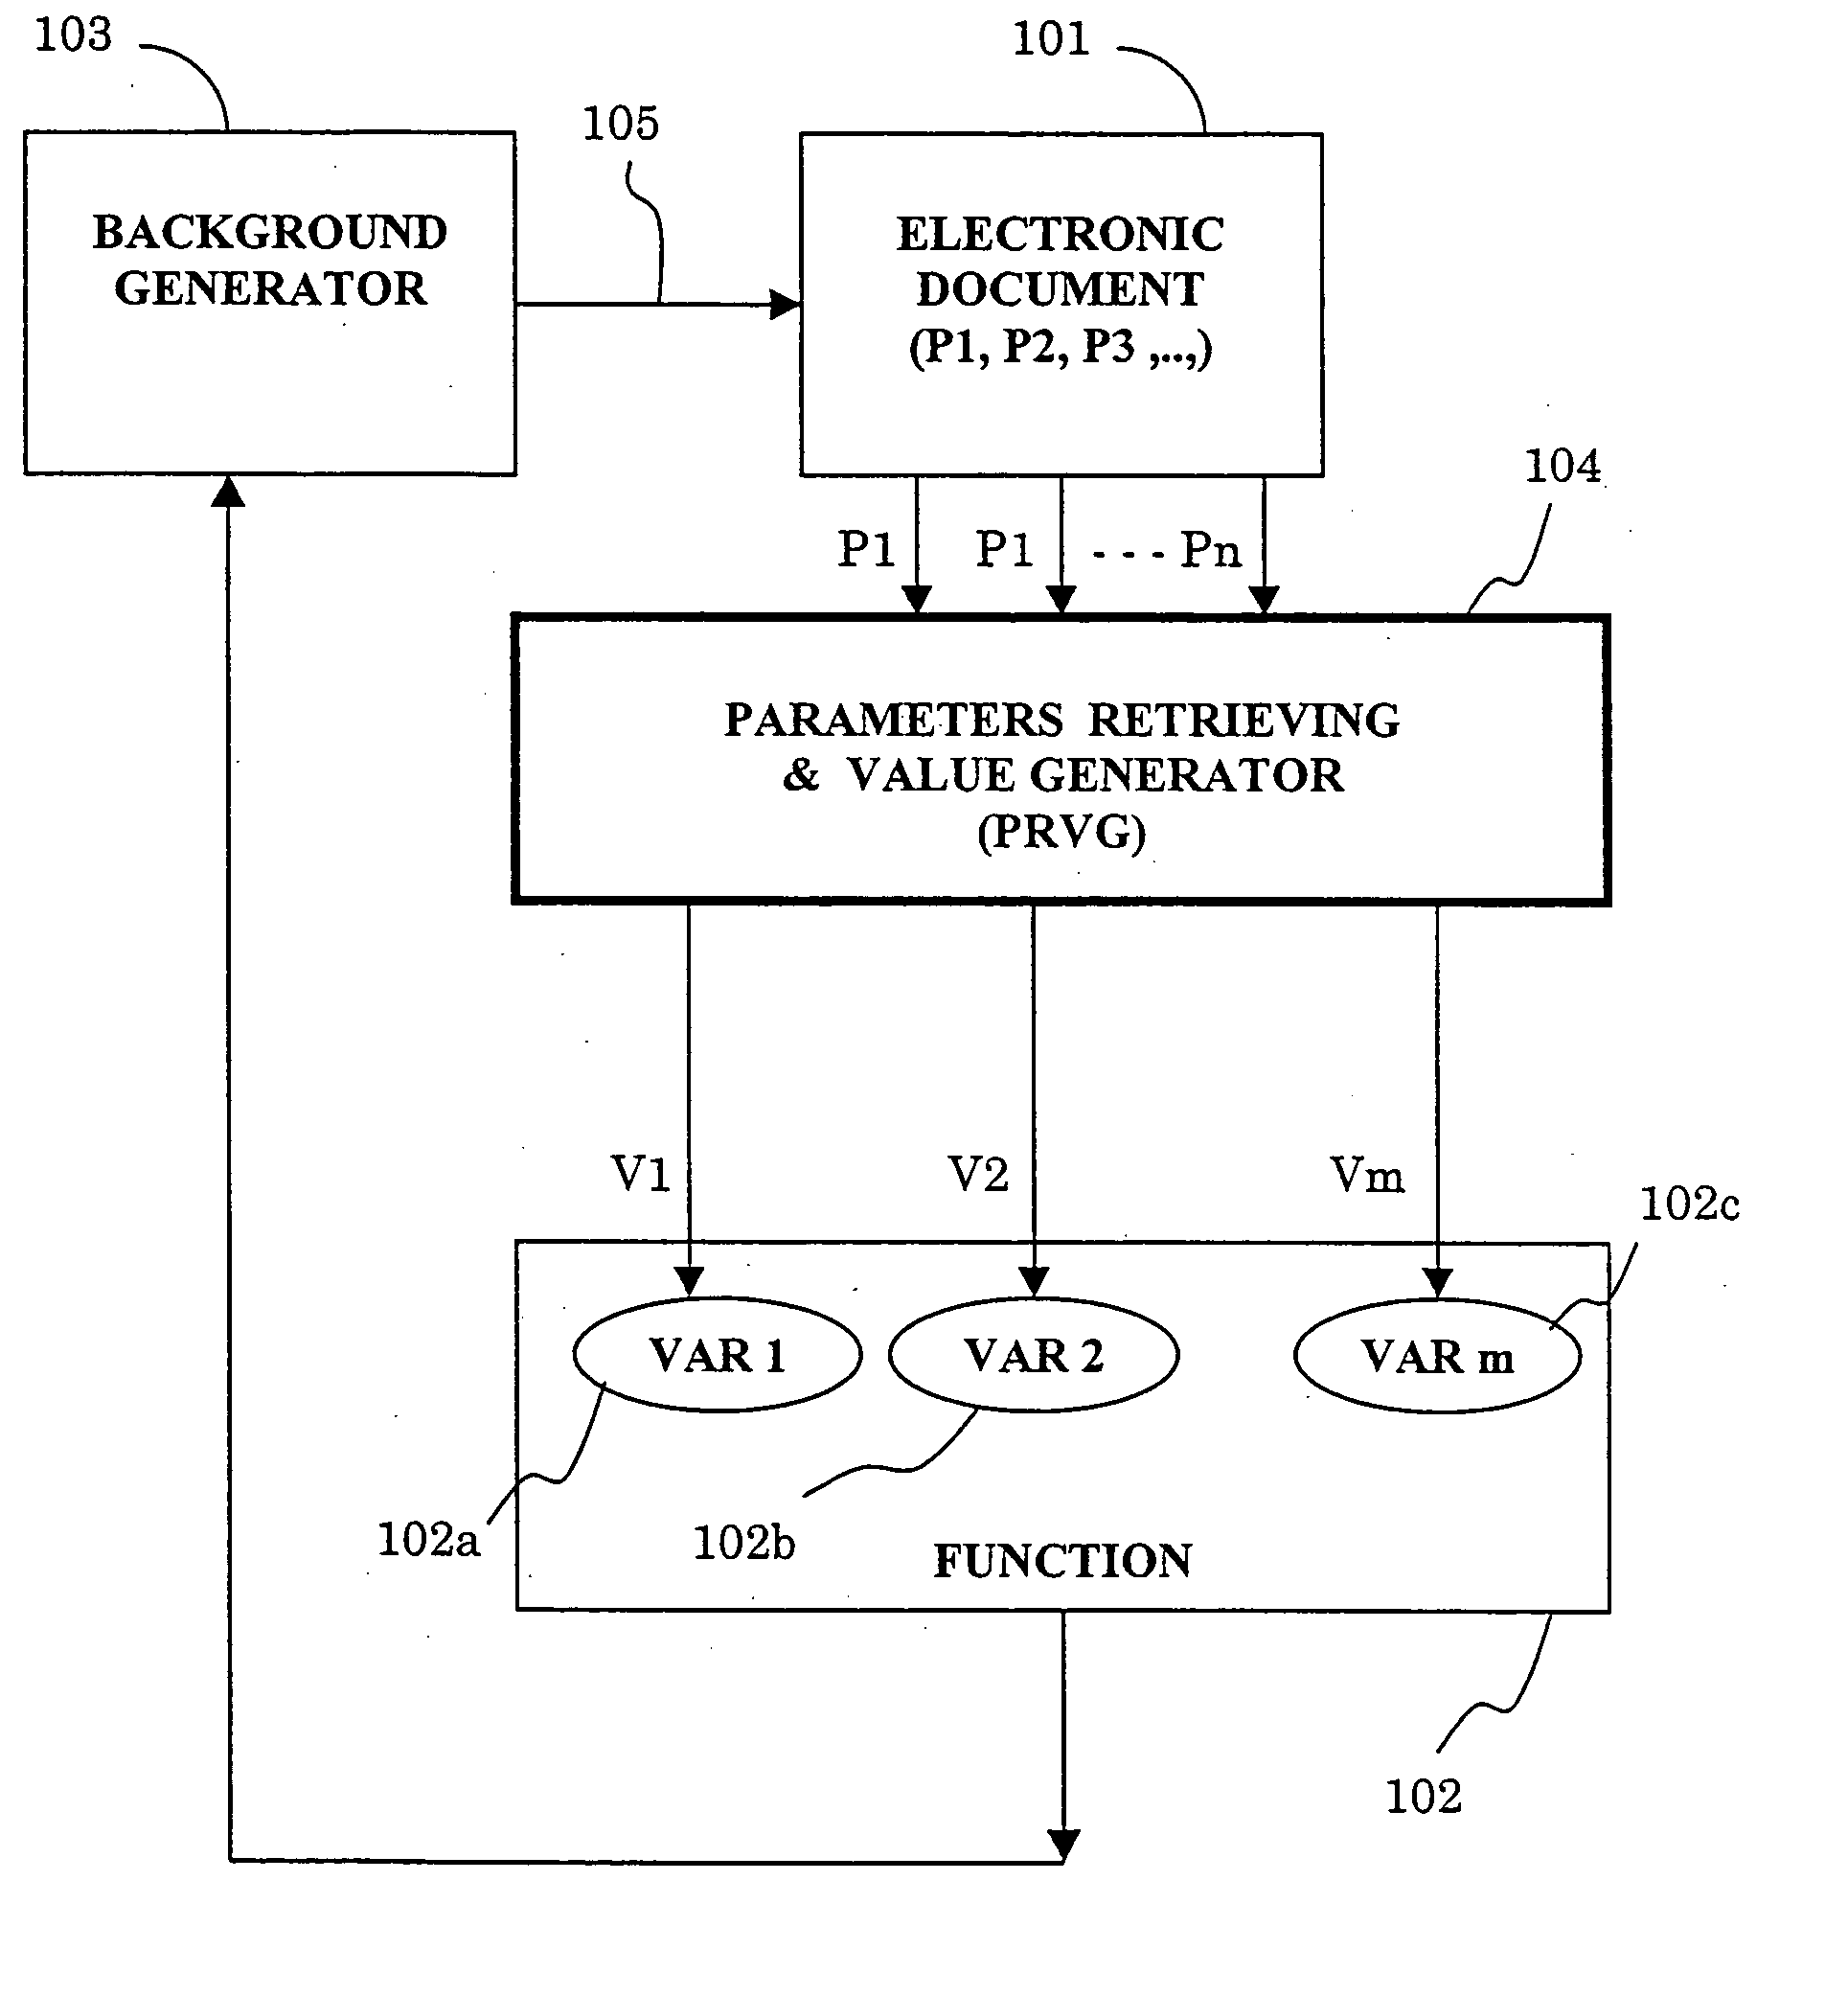 Method and system for assigning a background to a document and document having a background made according to the method and system